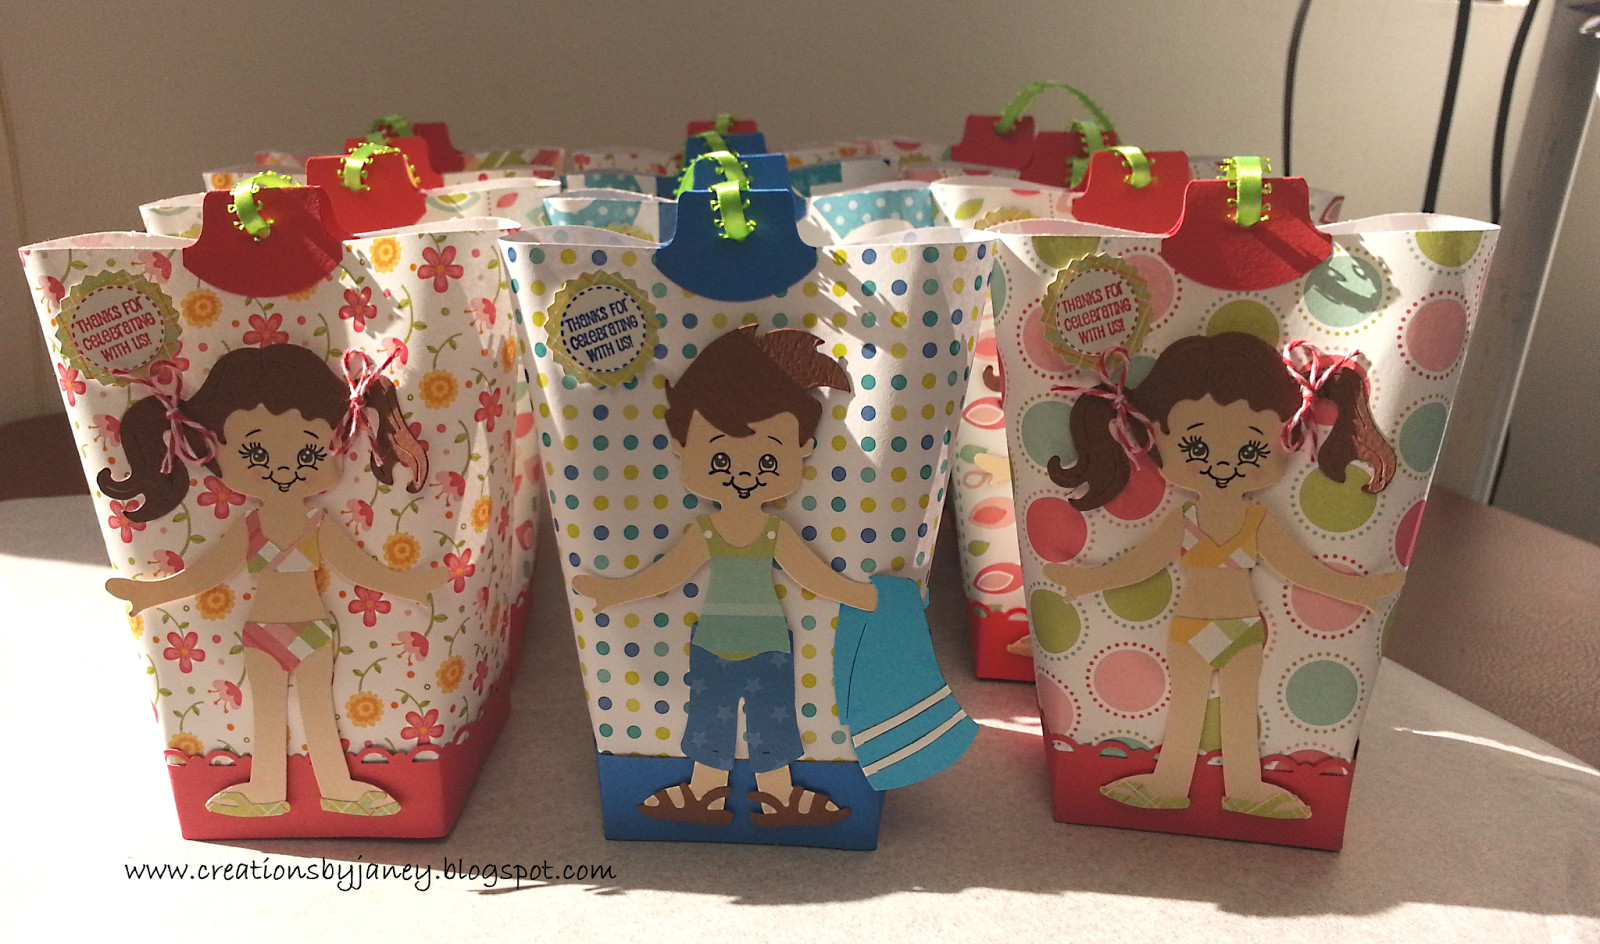 Pool Party Goody Bag Ideas
 Creations by Janey Pool party treat bags